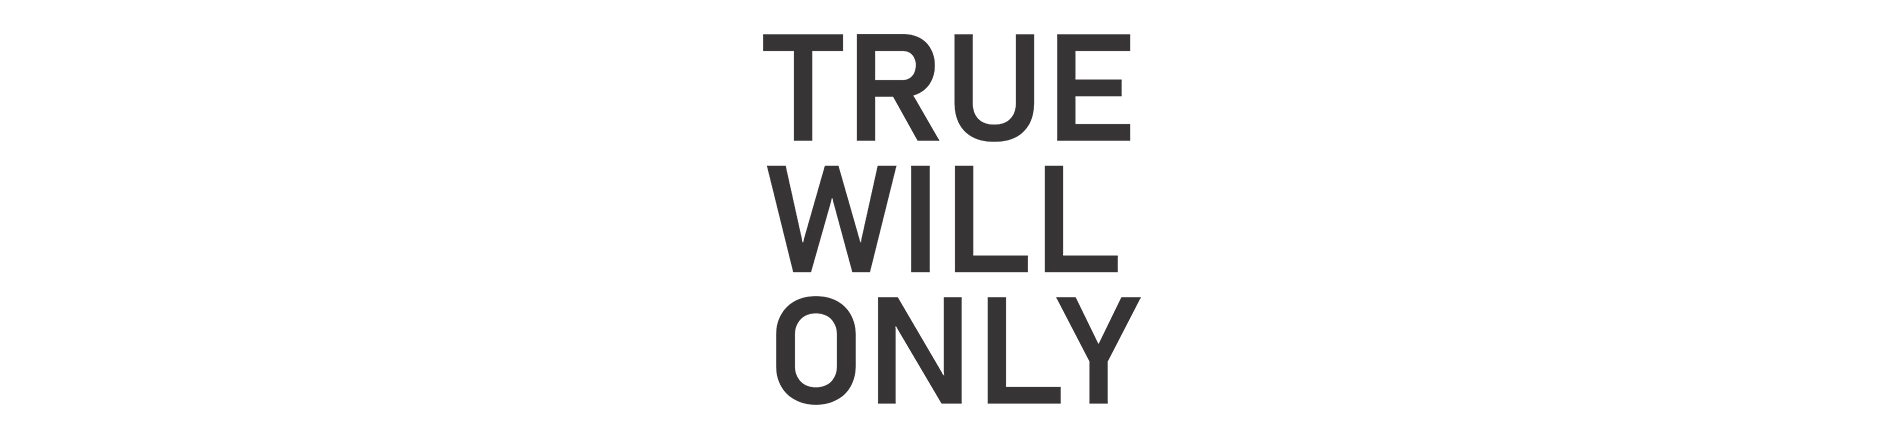 TRUE WILL ONLY